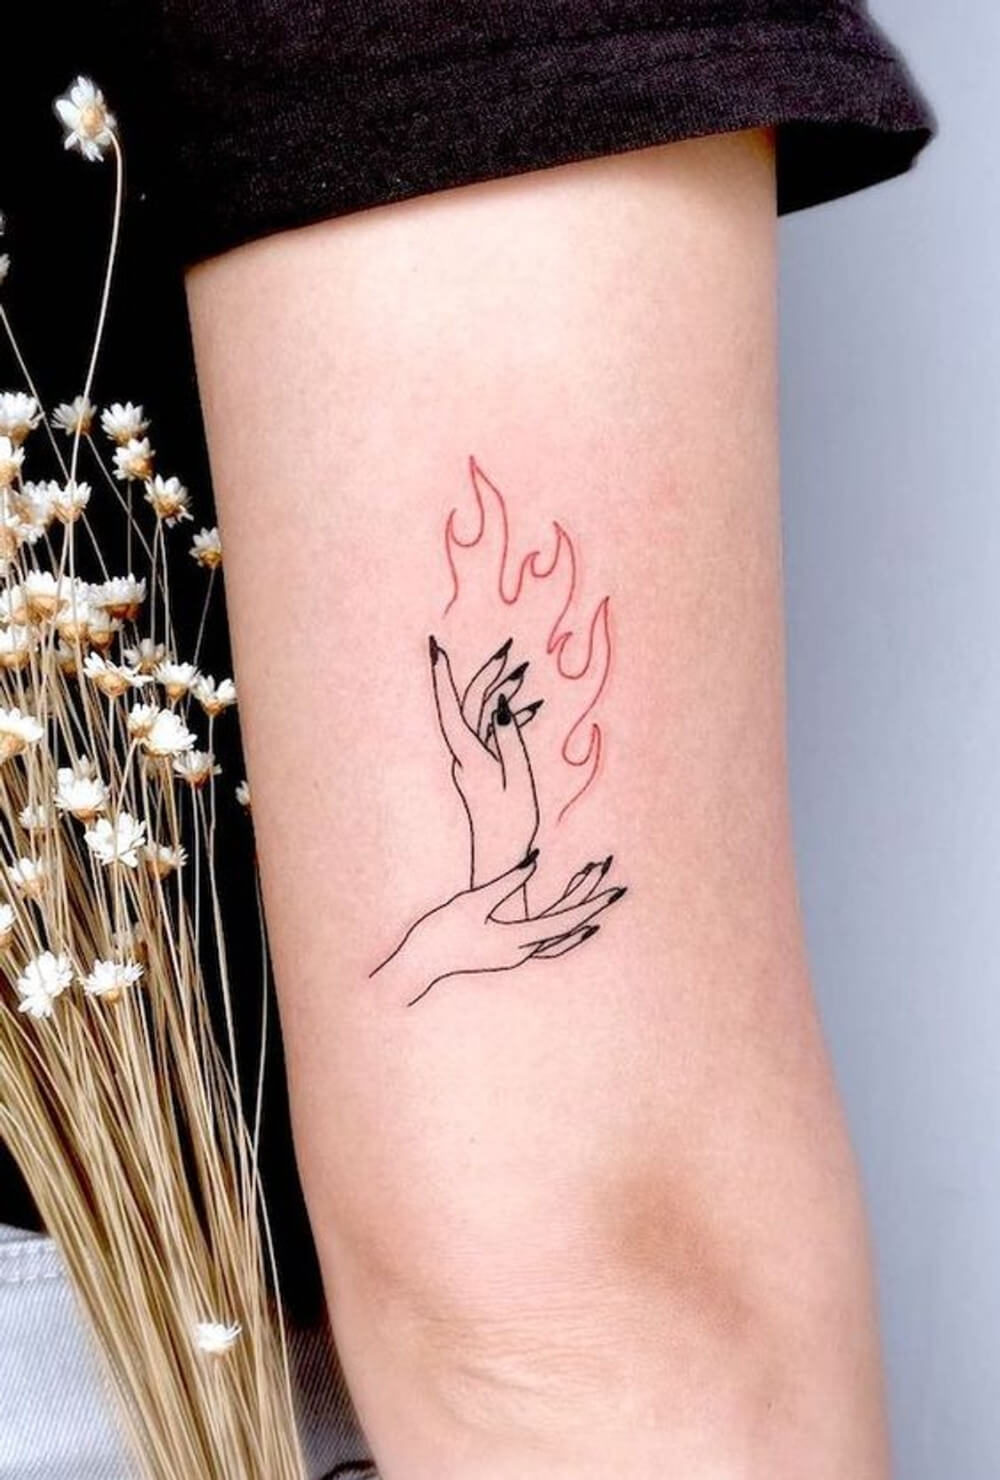 50 Minimal Tattoo Designs That Prove Simple Doesn’t Meant Boring - 343